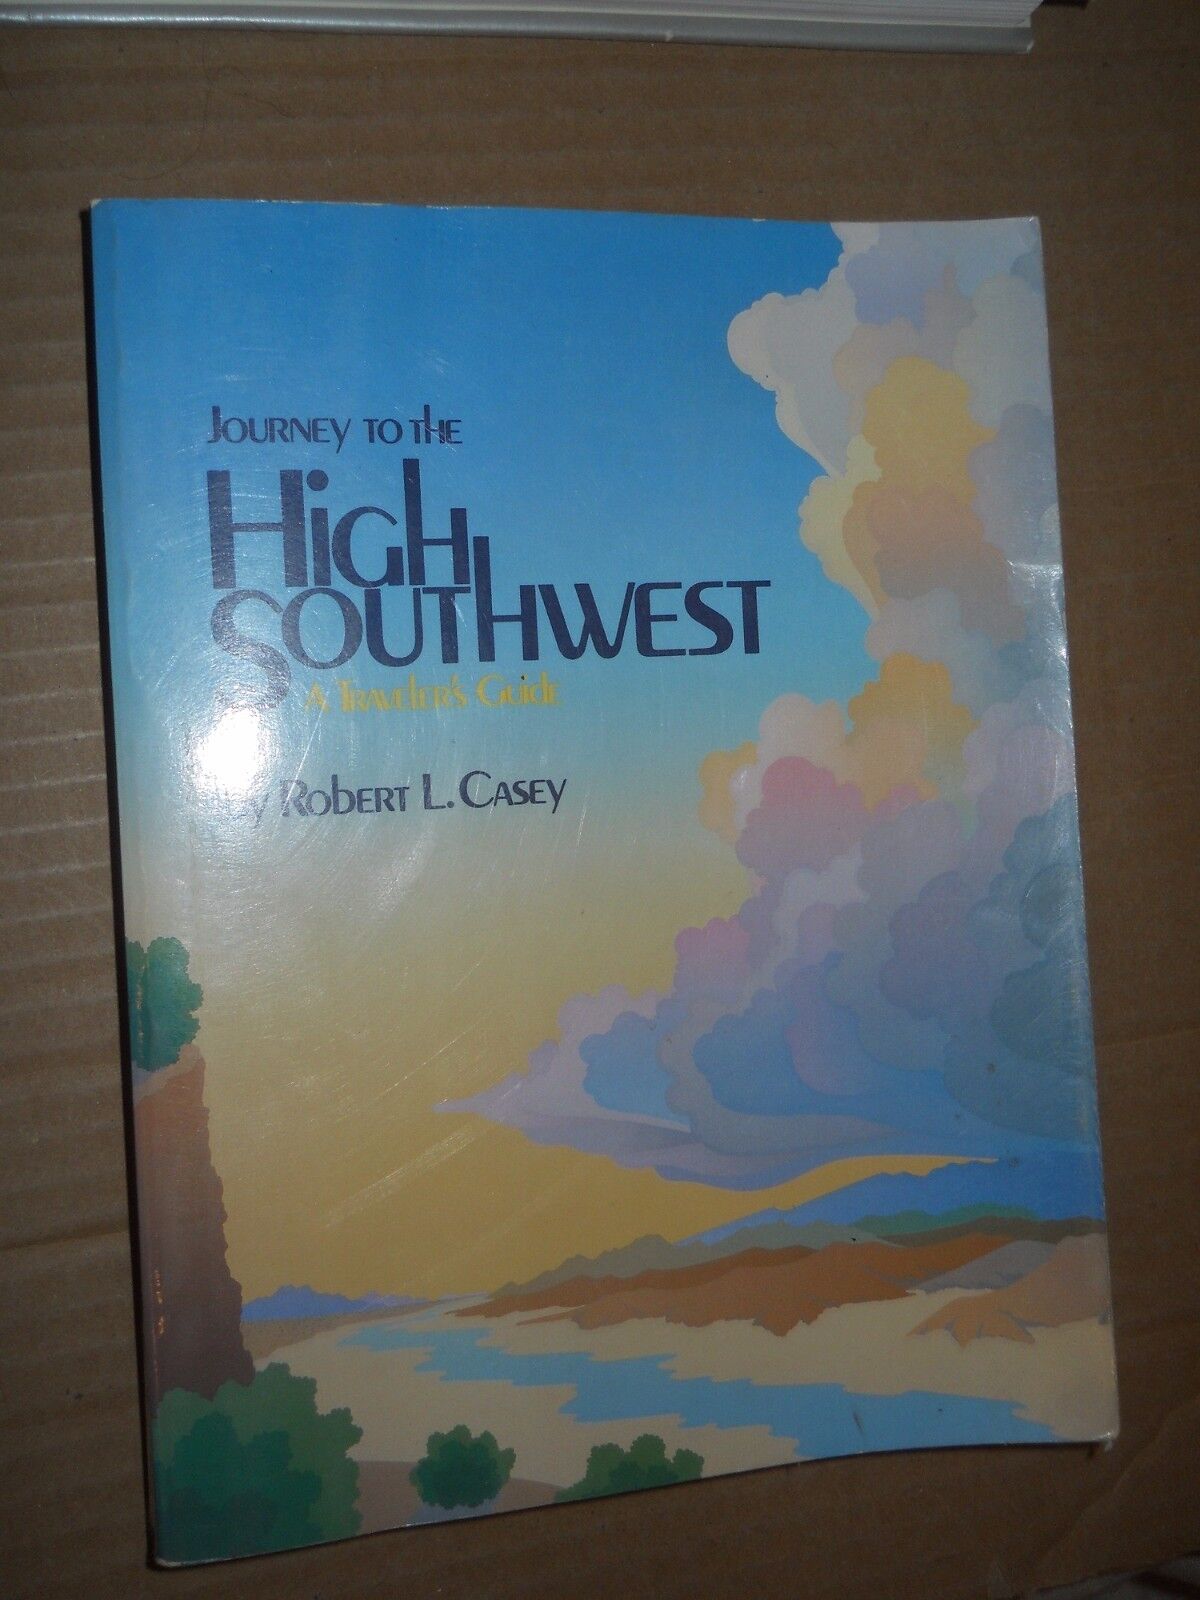 Journey to The High Southwest: A Traveler\'s Guide  by Robert L. Casey  (1983, PB